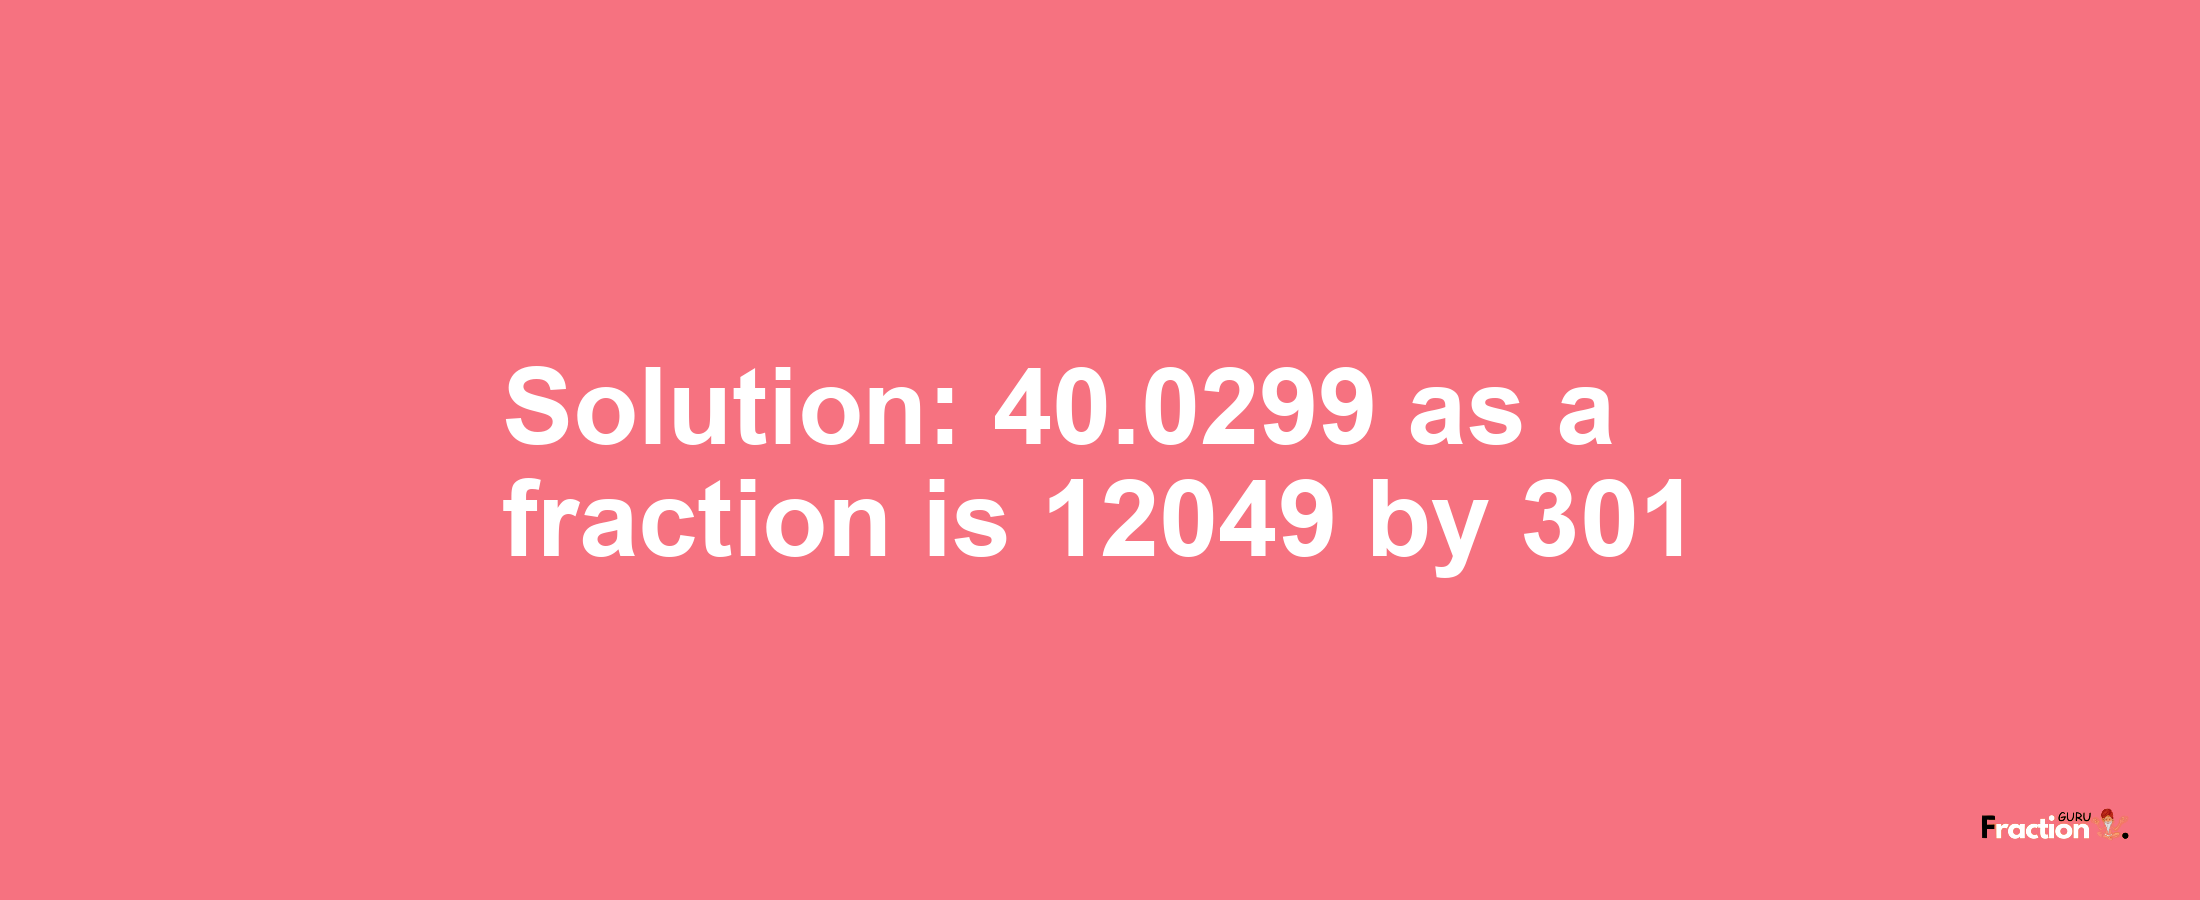 Solution:40.0299 as a fraction is 12049/301